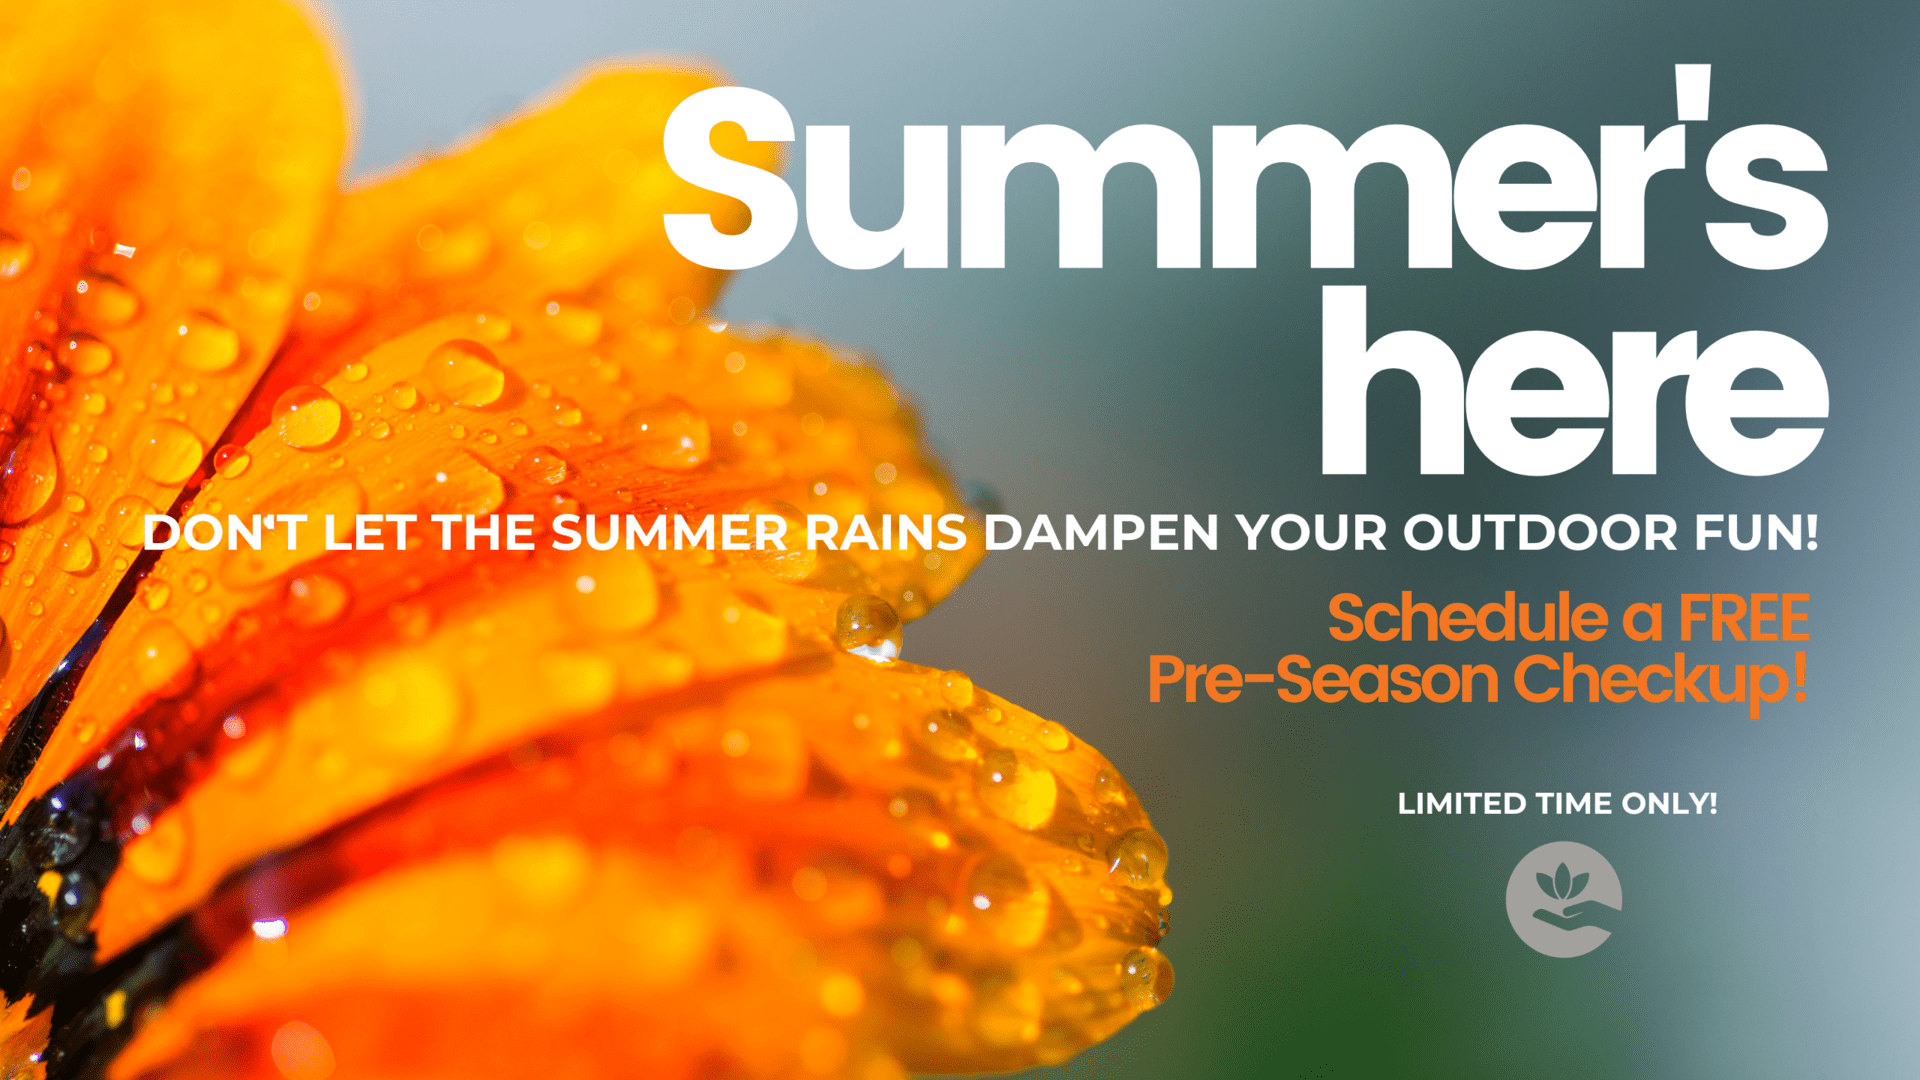 Summer's here. Don't let the summer rains dampen your outdoor fun! Schedule a FREE Pre-Season Checkup! LIMITED TIME ONLY!